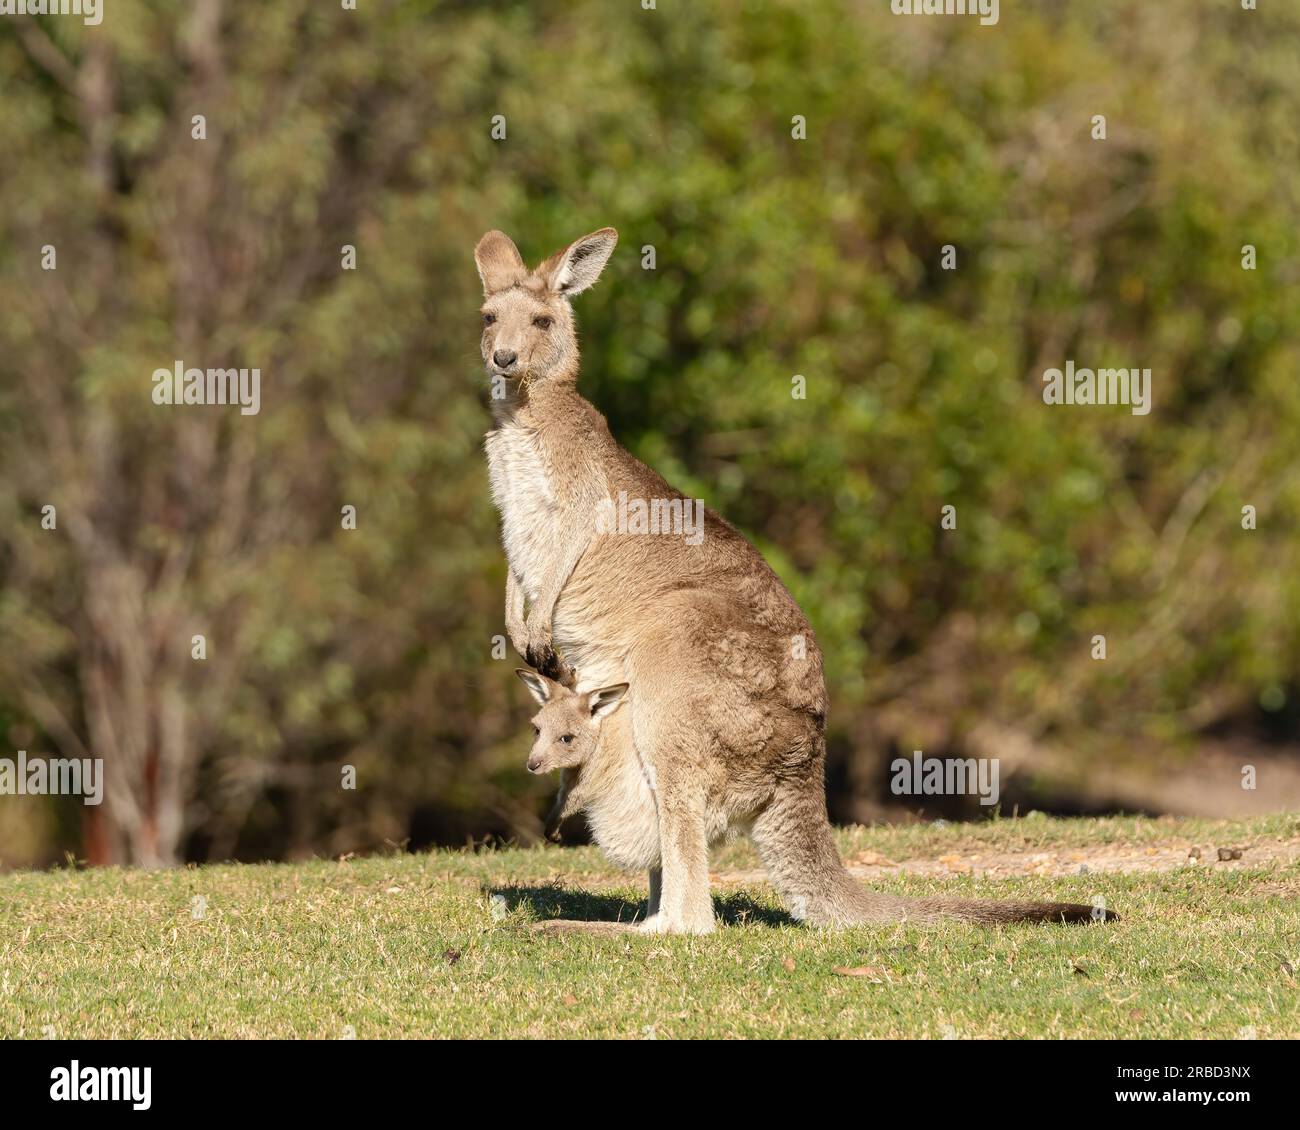 Eastern grey kangaroo with jory in her pouch with a blured background. Stock Photo